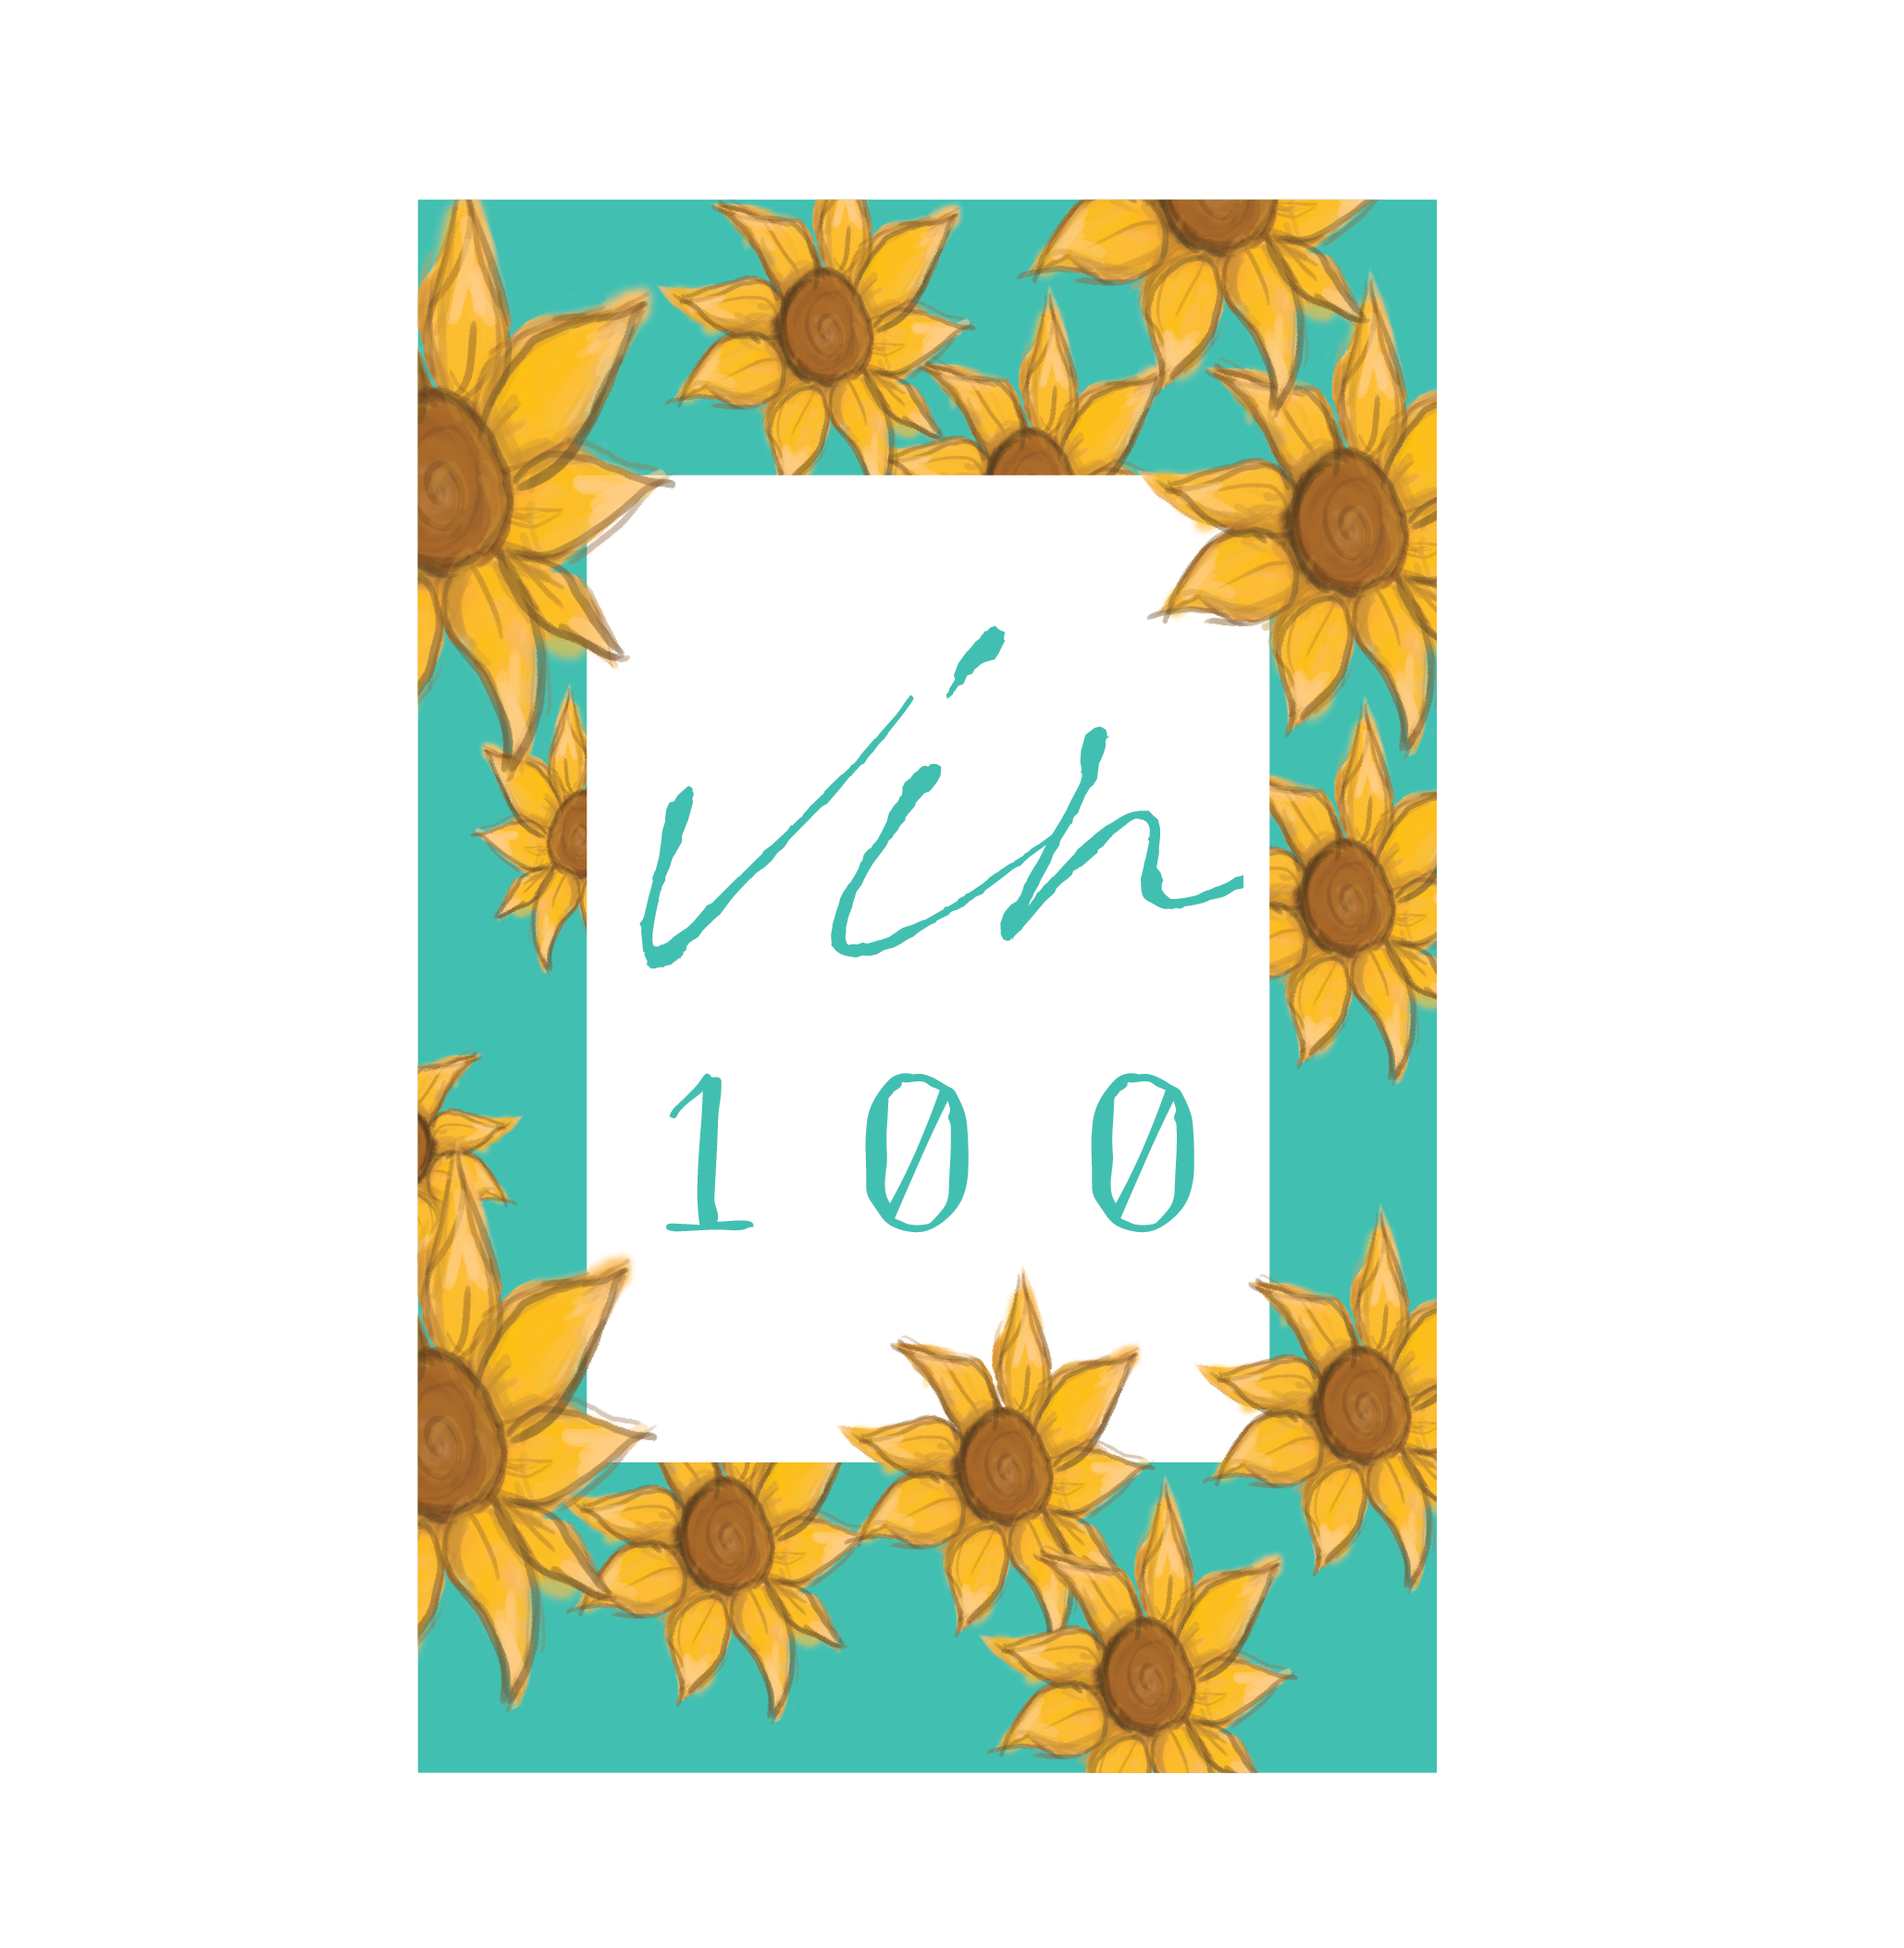 Logo with sunflowers as border, for wine label pronounced VINCENT 